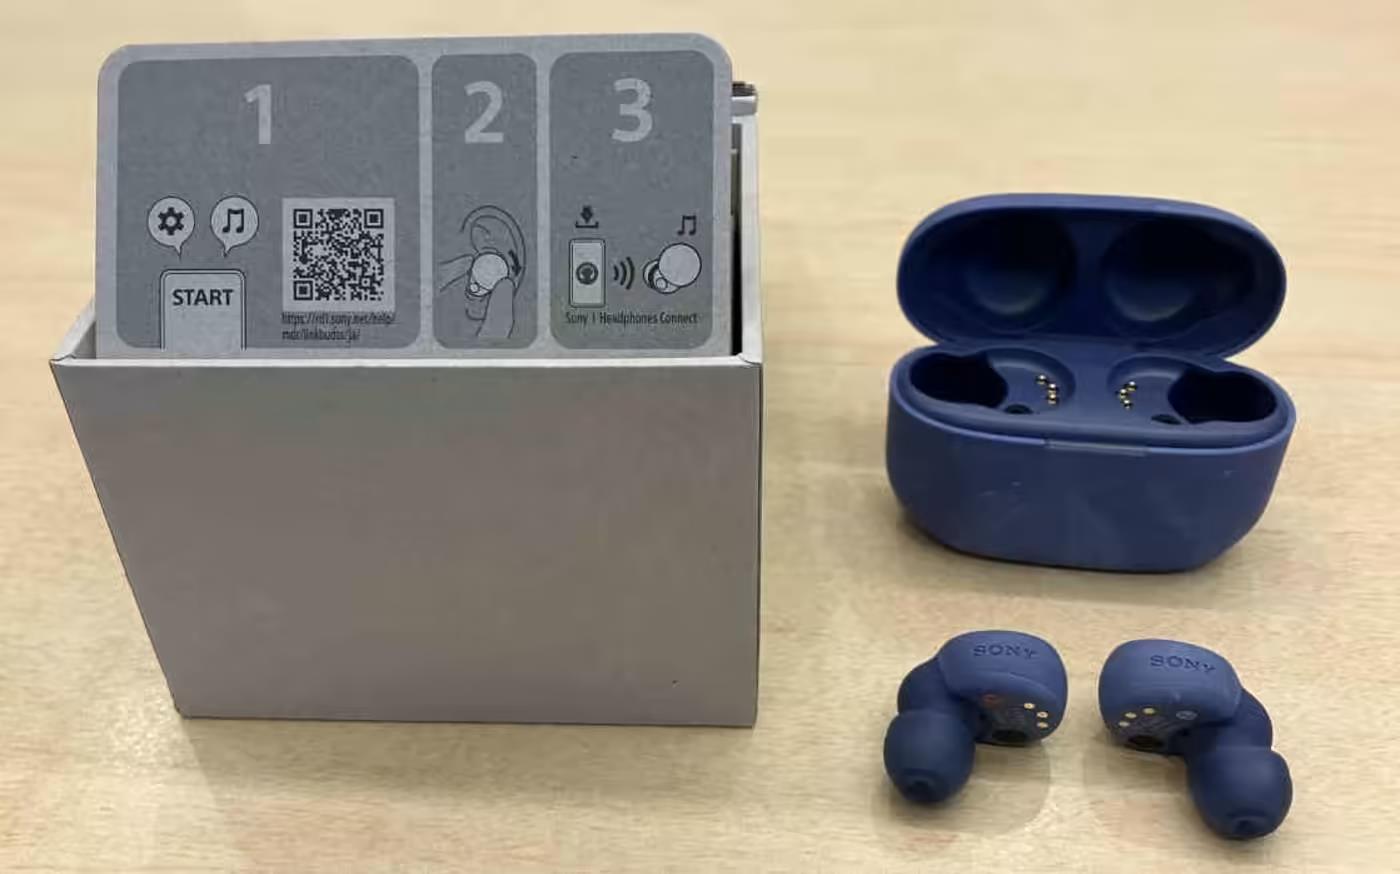 Sony to eliminate plastic packaging, starting with phones and earbuds